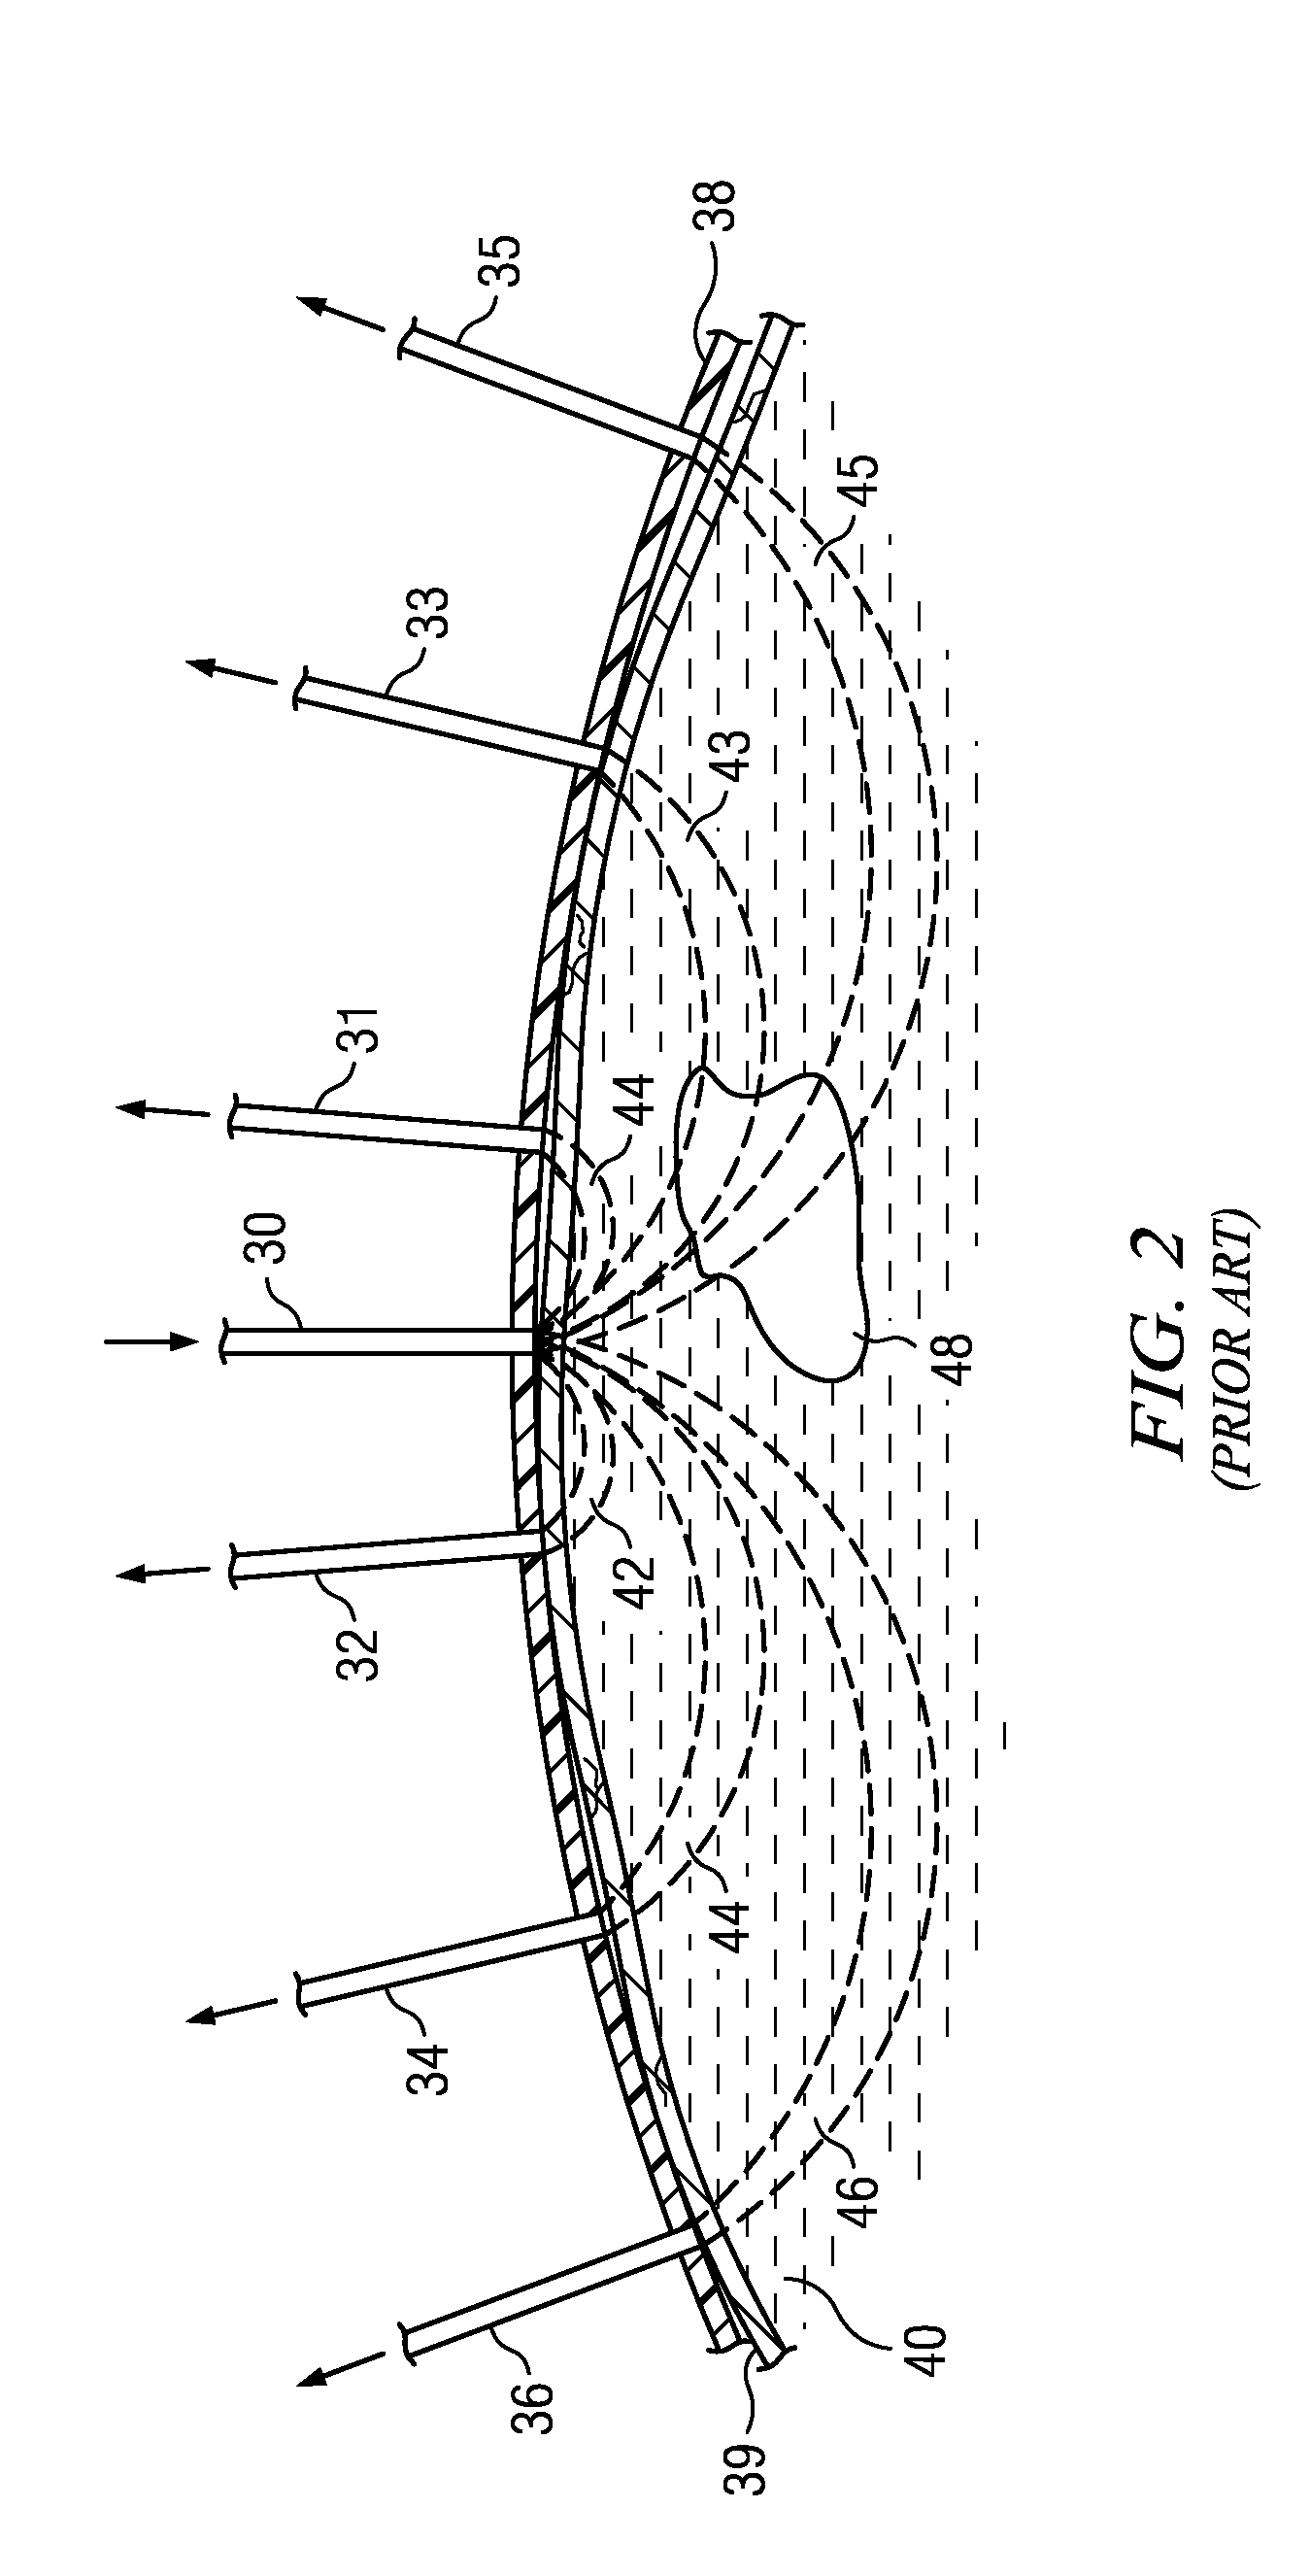 Functional Near Infrared Spectroscopy Imaging System and Method